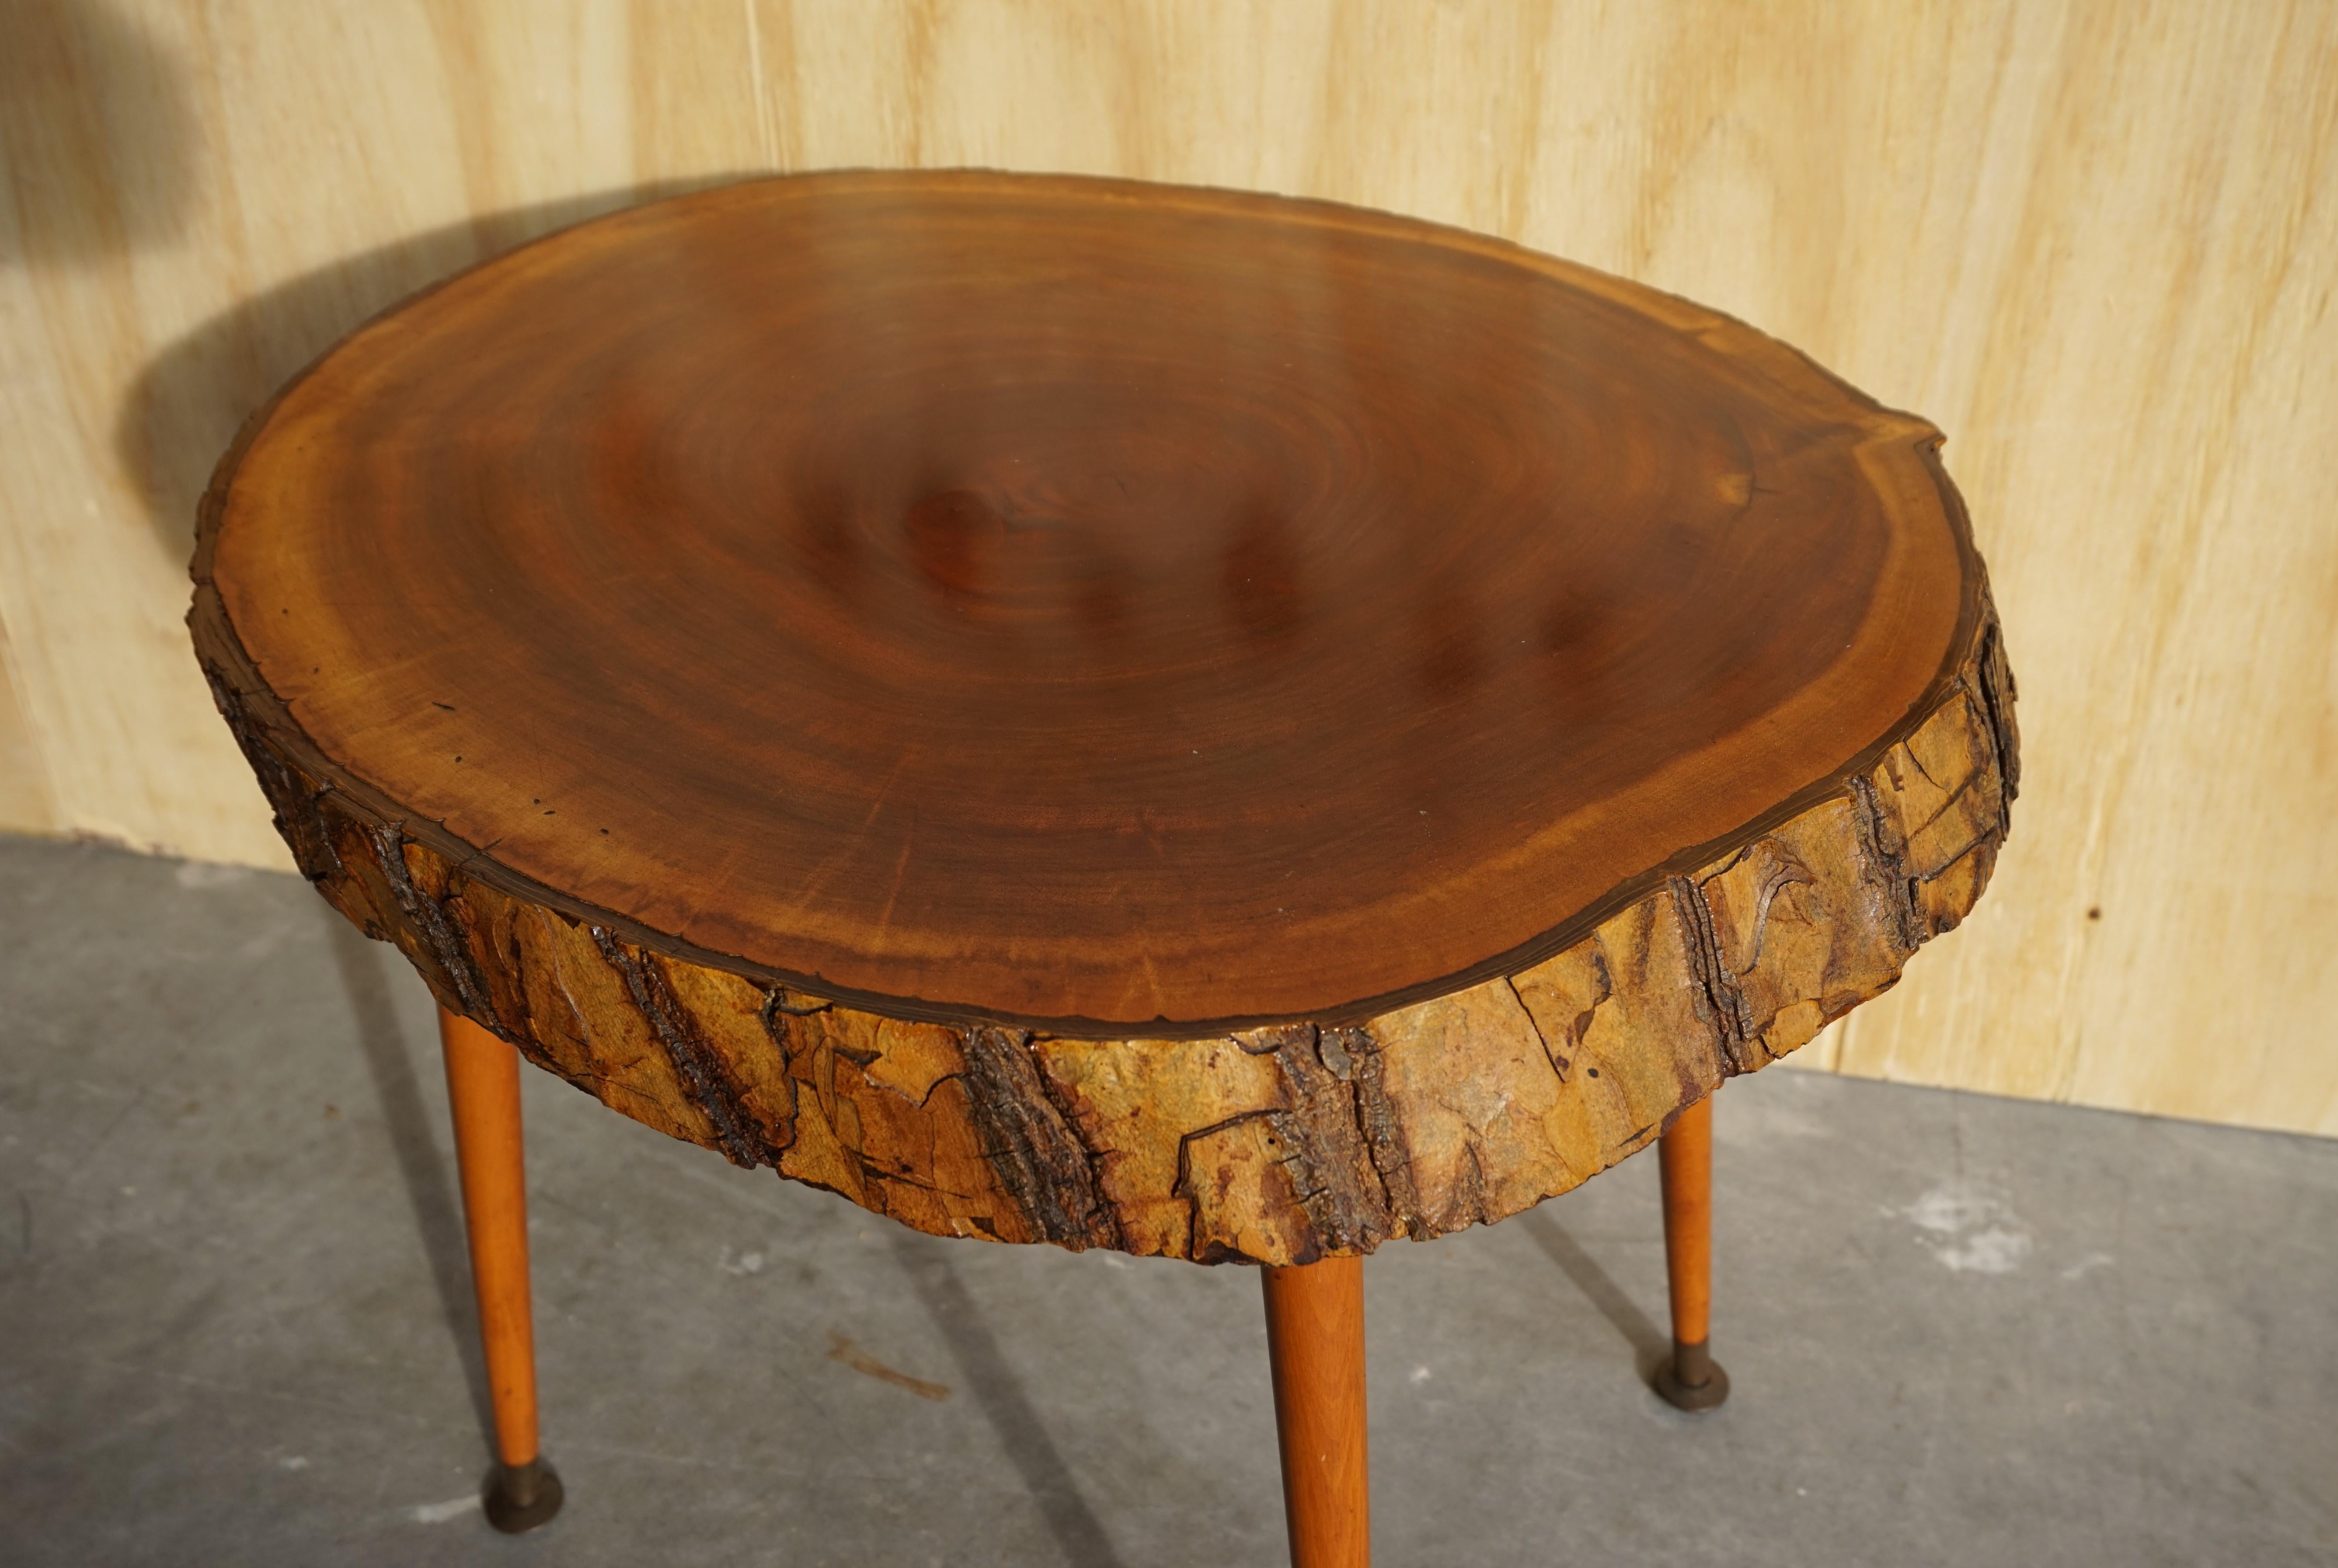 Midcentury Made Organic Modern Wine or End Table with Walnut & Bark Table Top For Sale 6